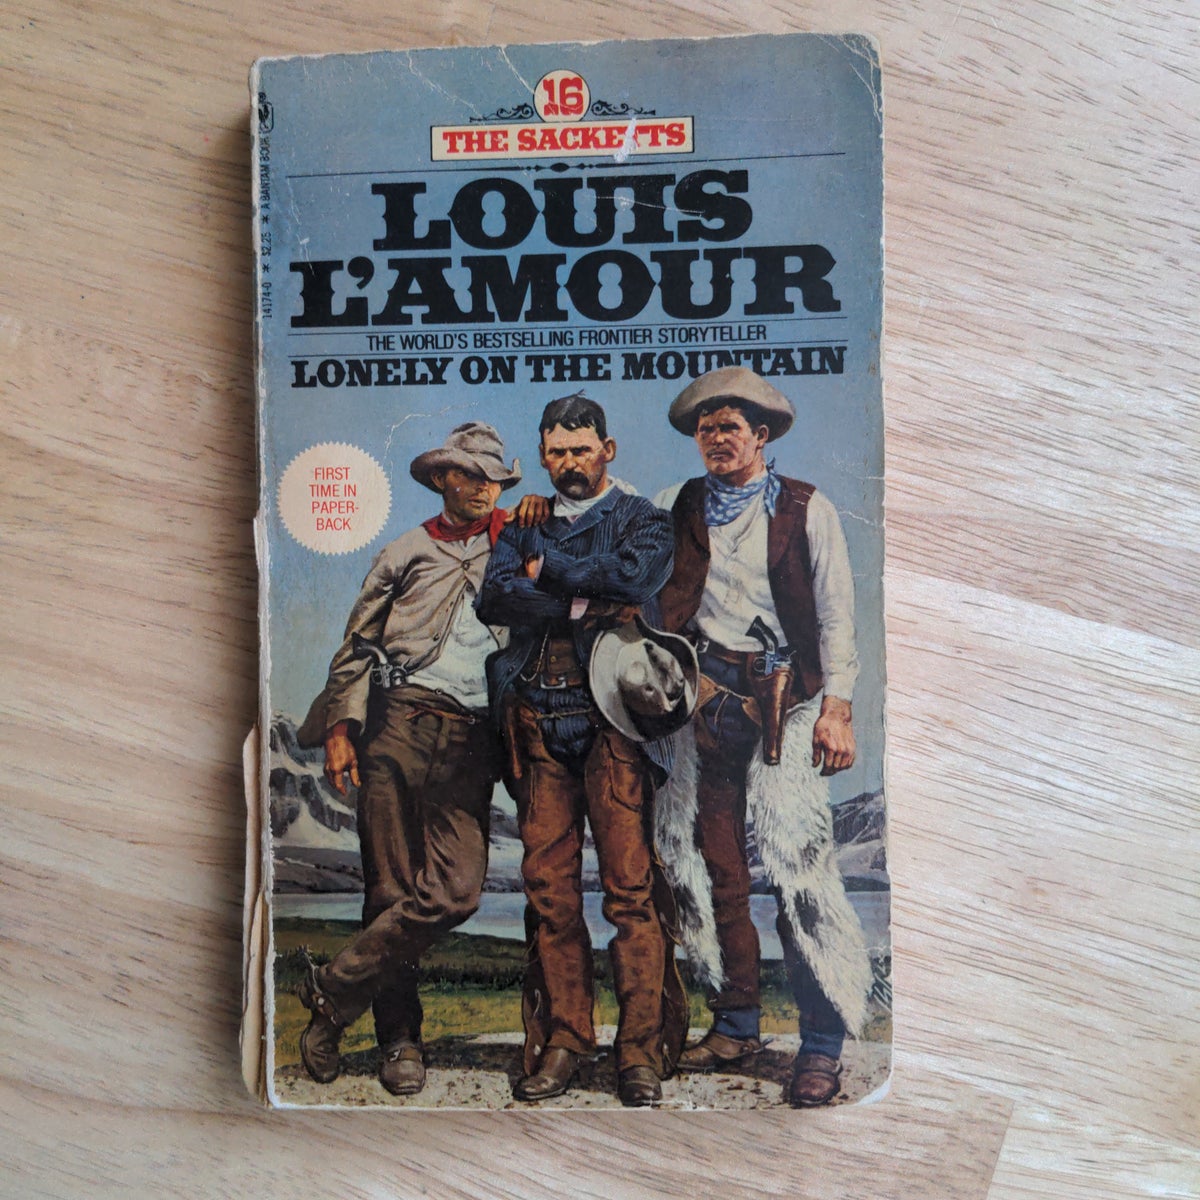 The Sackett Companion by Louis L'Amour